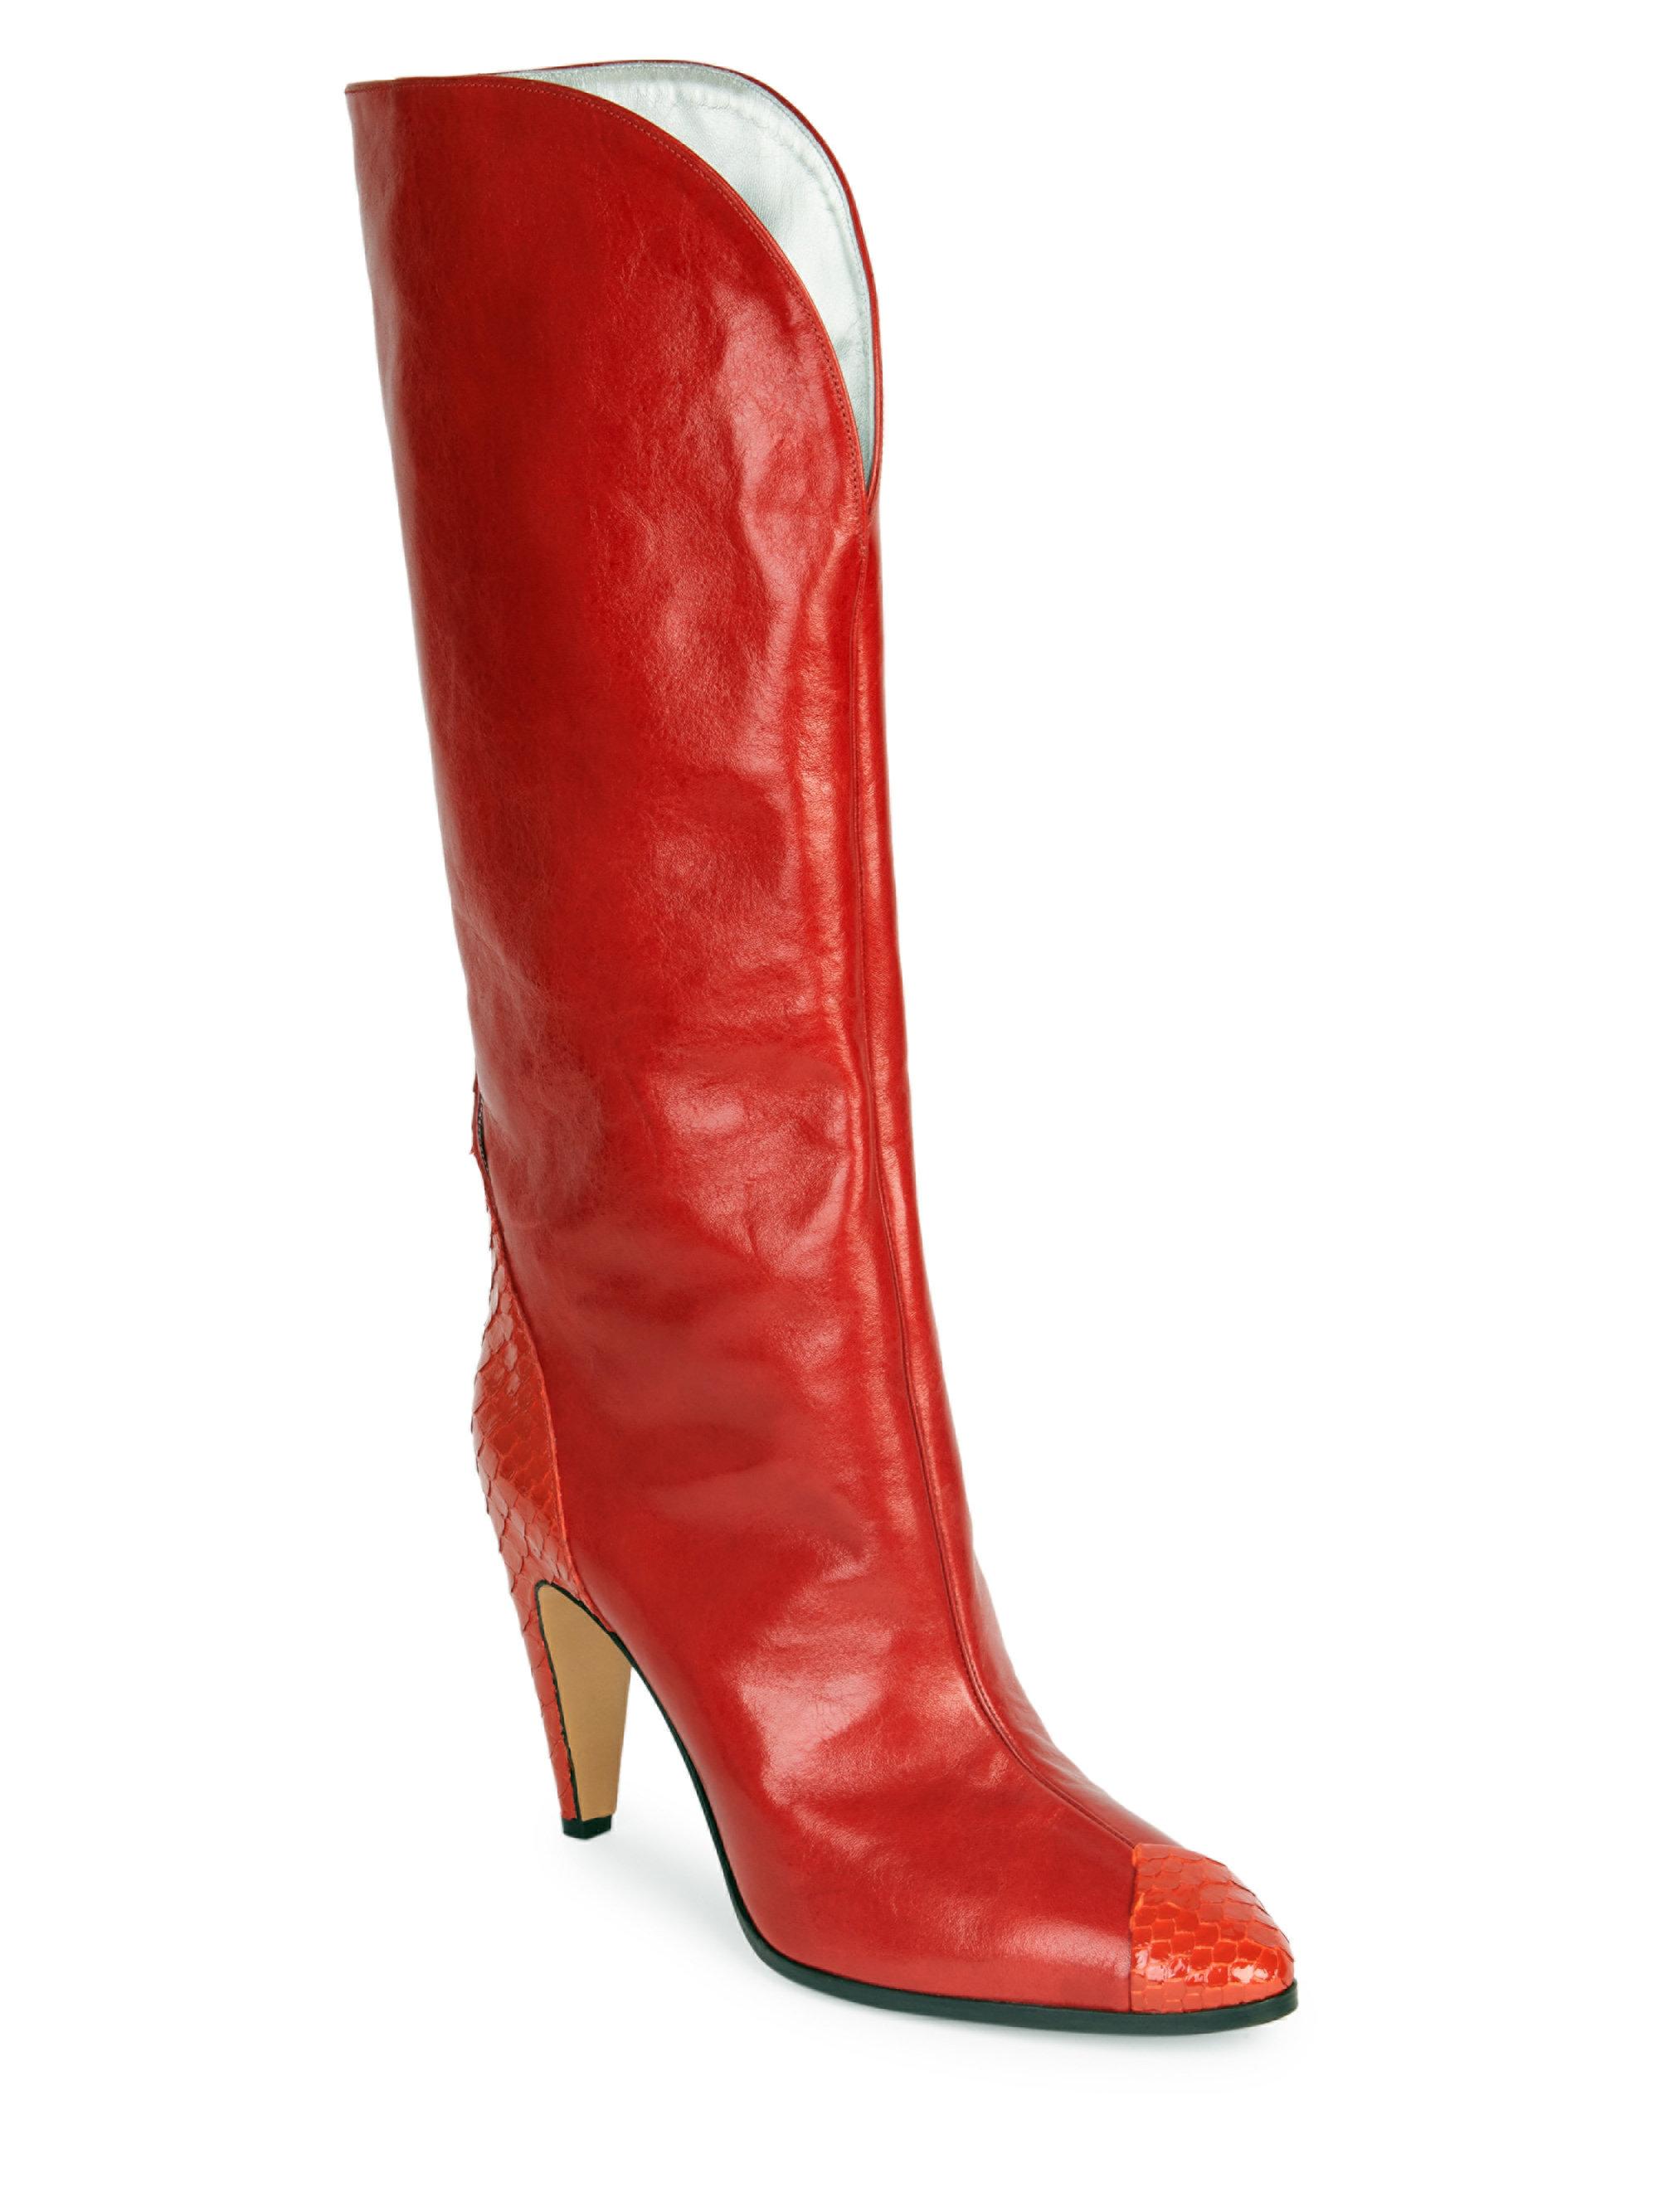 Givenchy Show Python Leather Boots in Red | Lyst